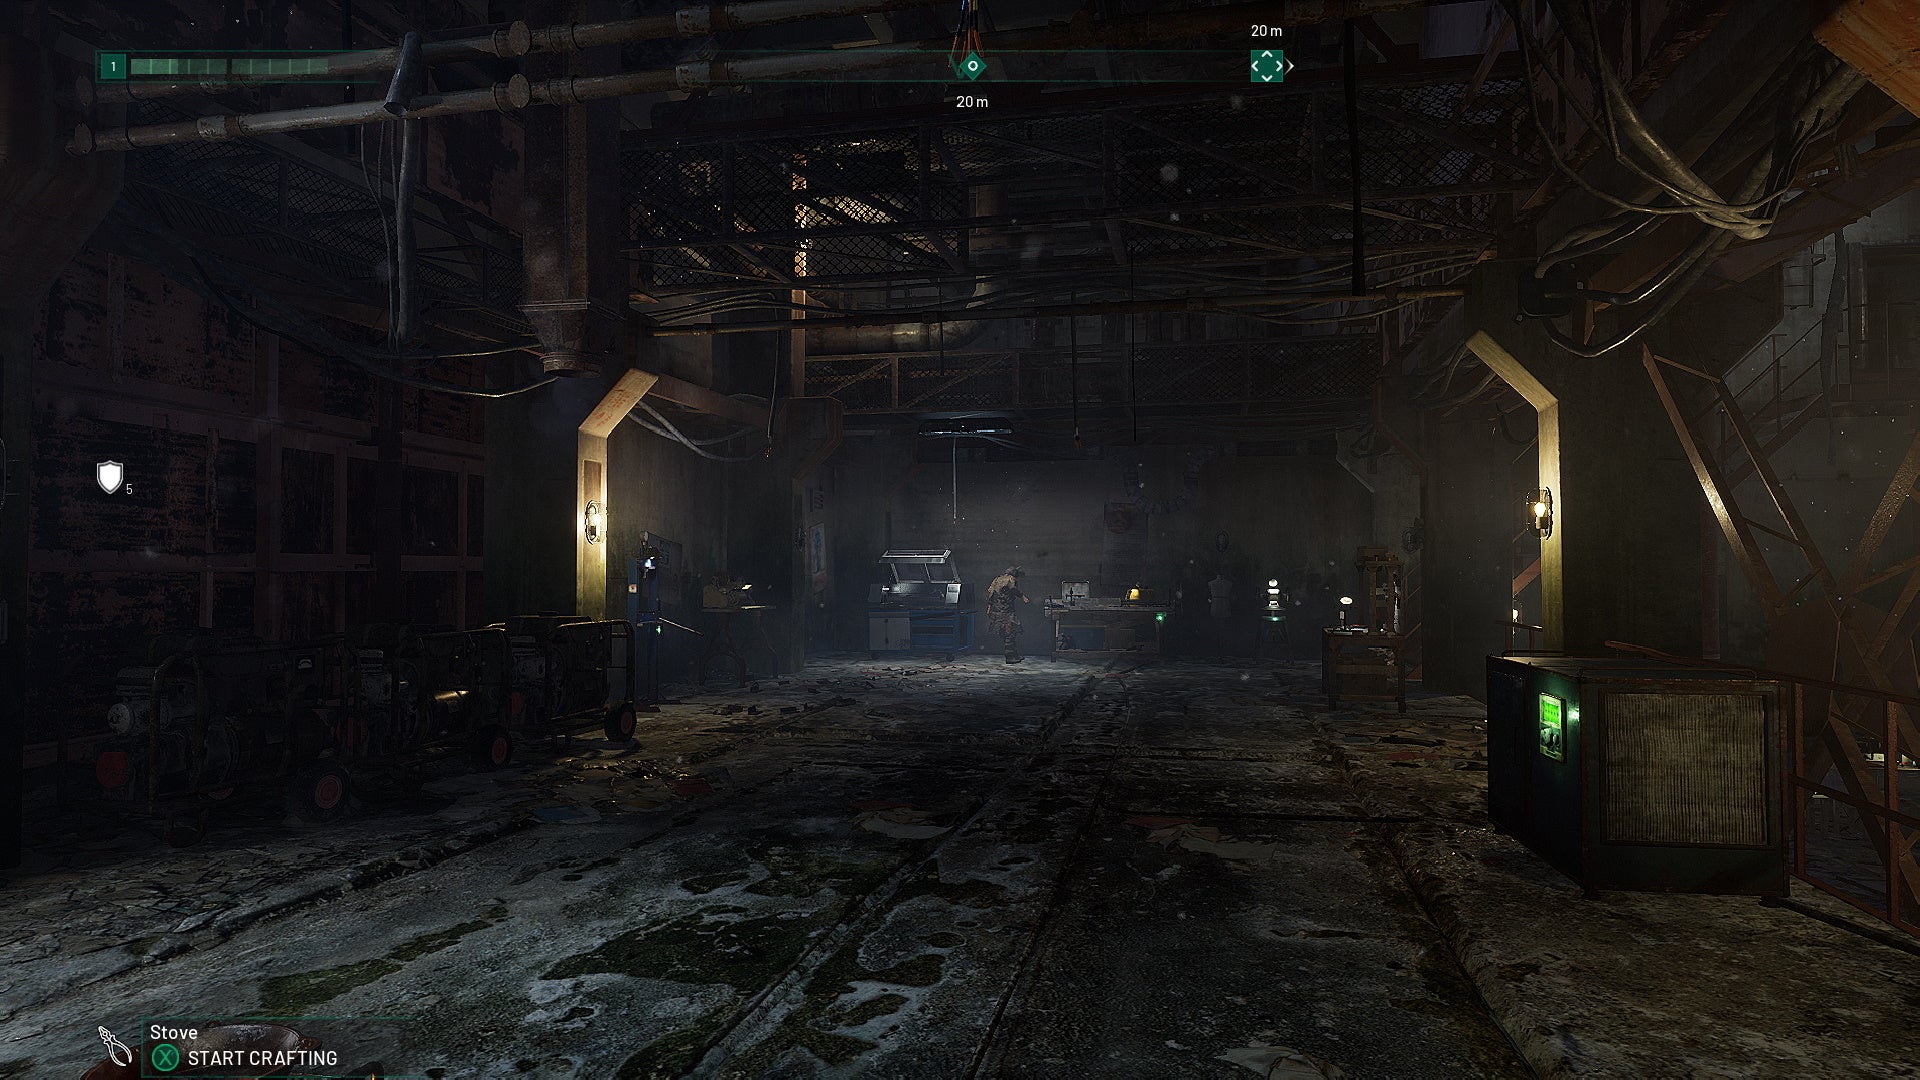 An image from Chernobylite which shows my dark base filled with crafting tables, and a character inspecting one in the background.